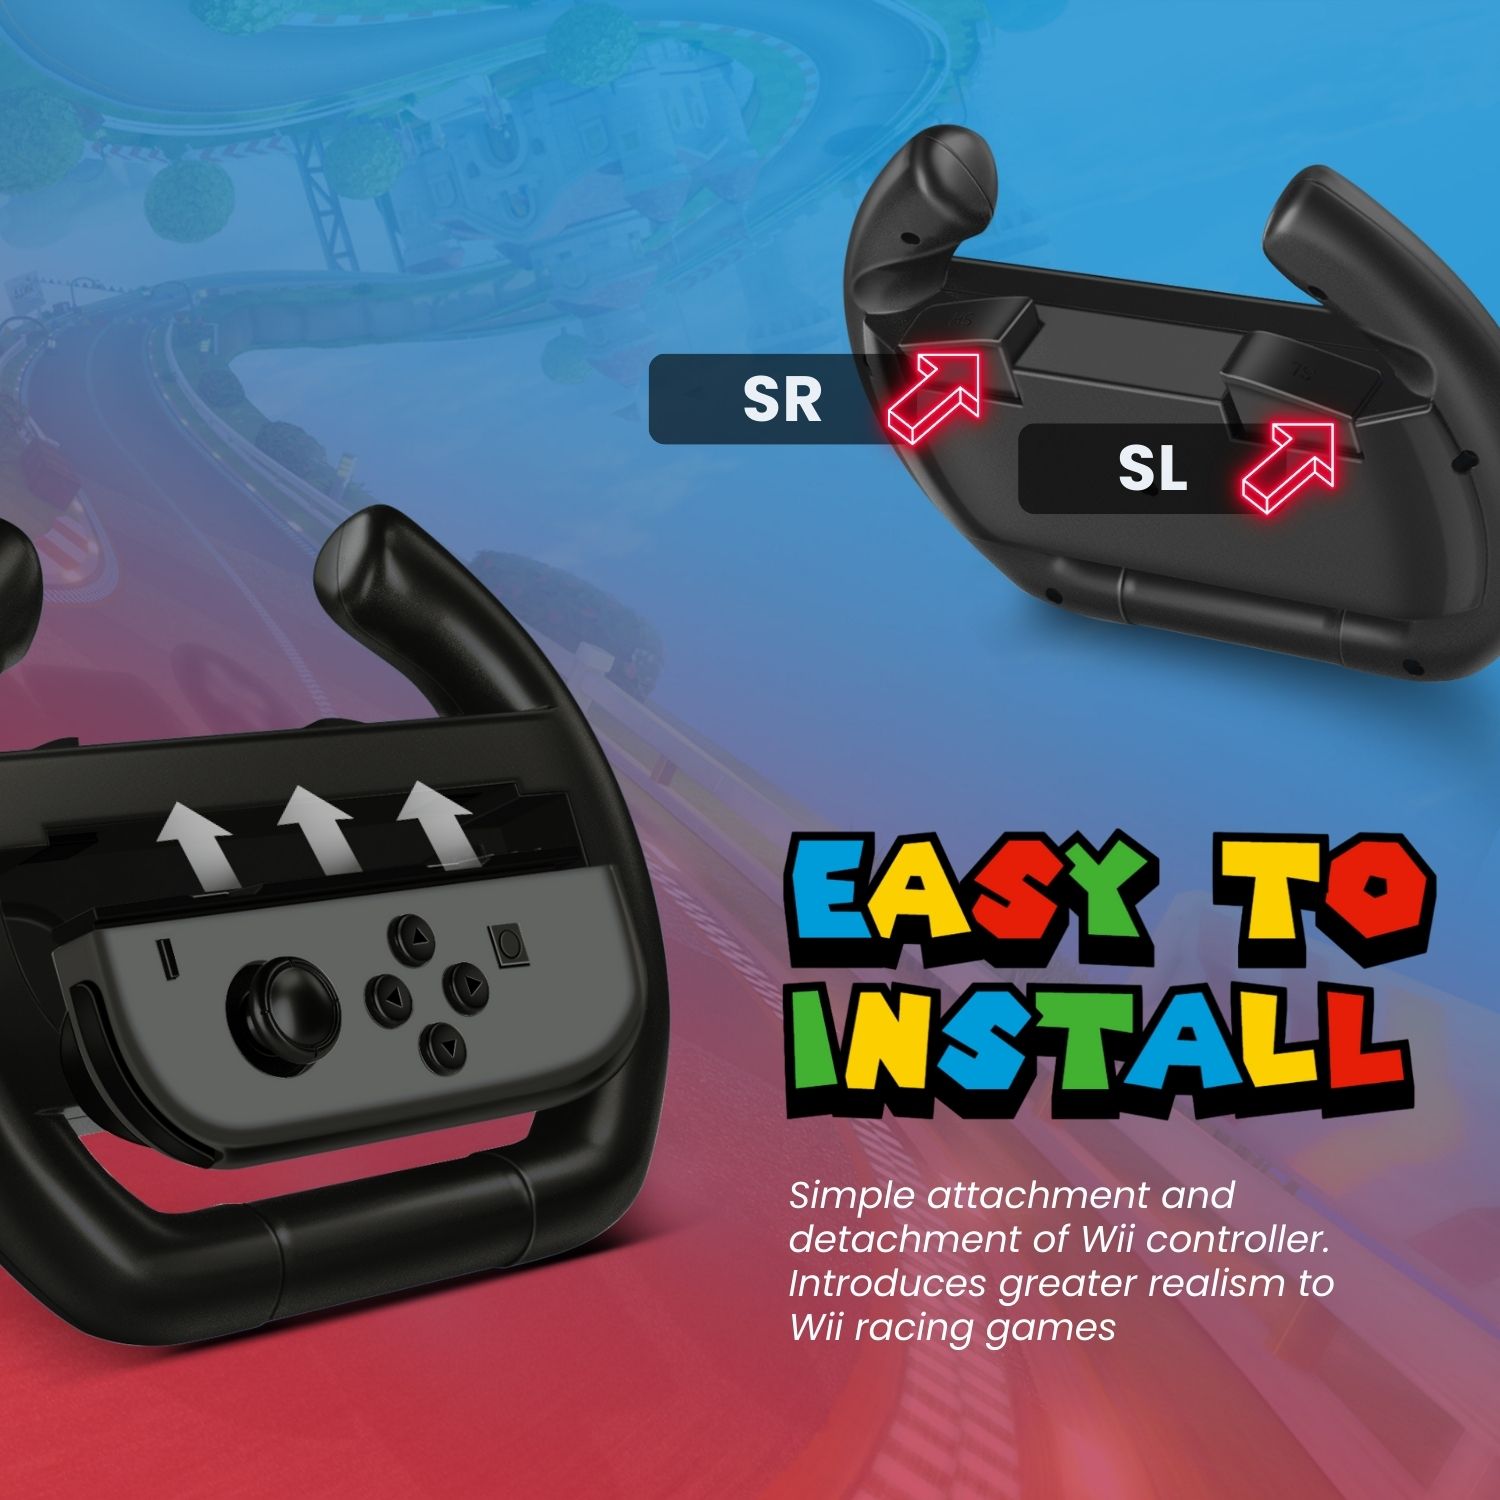 Simply slide your joy-con controller into the steering wheel attachment and add more fun gaming experience for all racing games on the Nintendo Switch